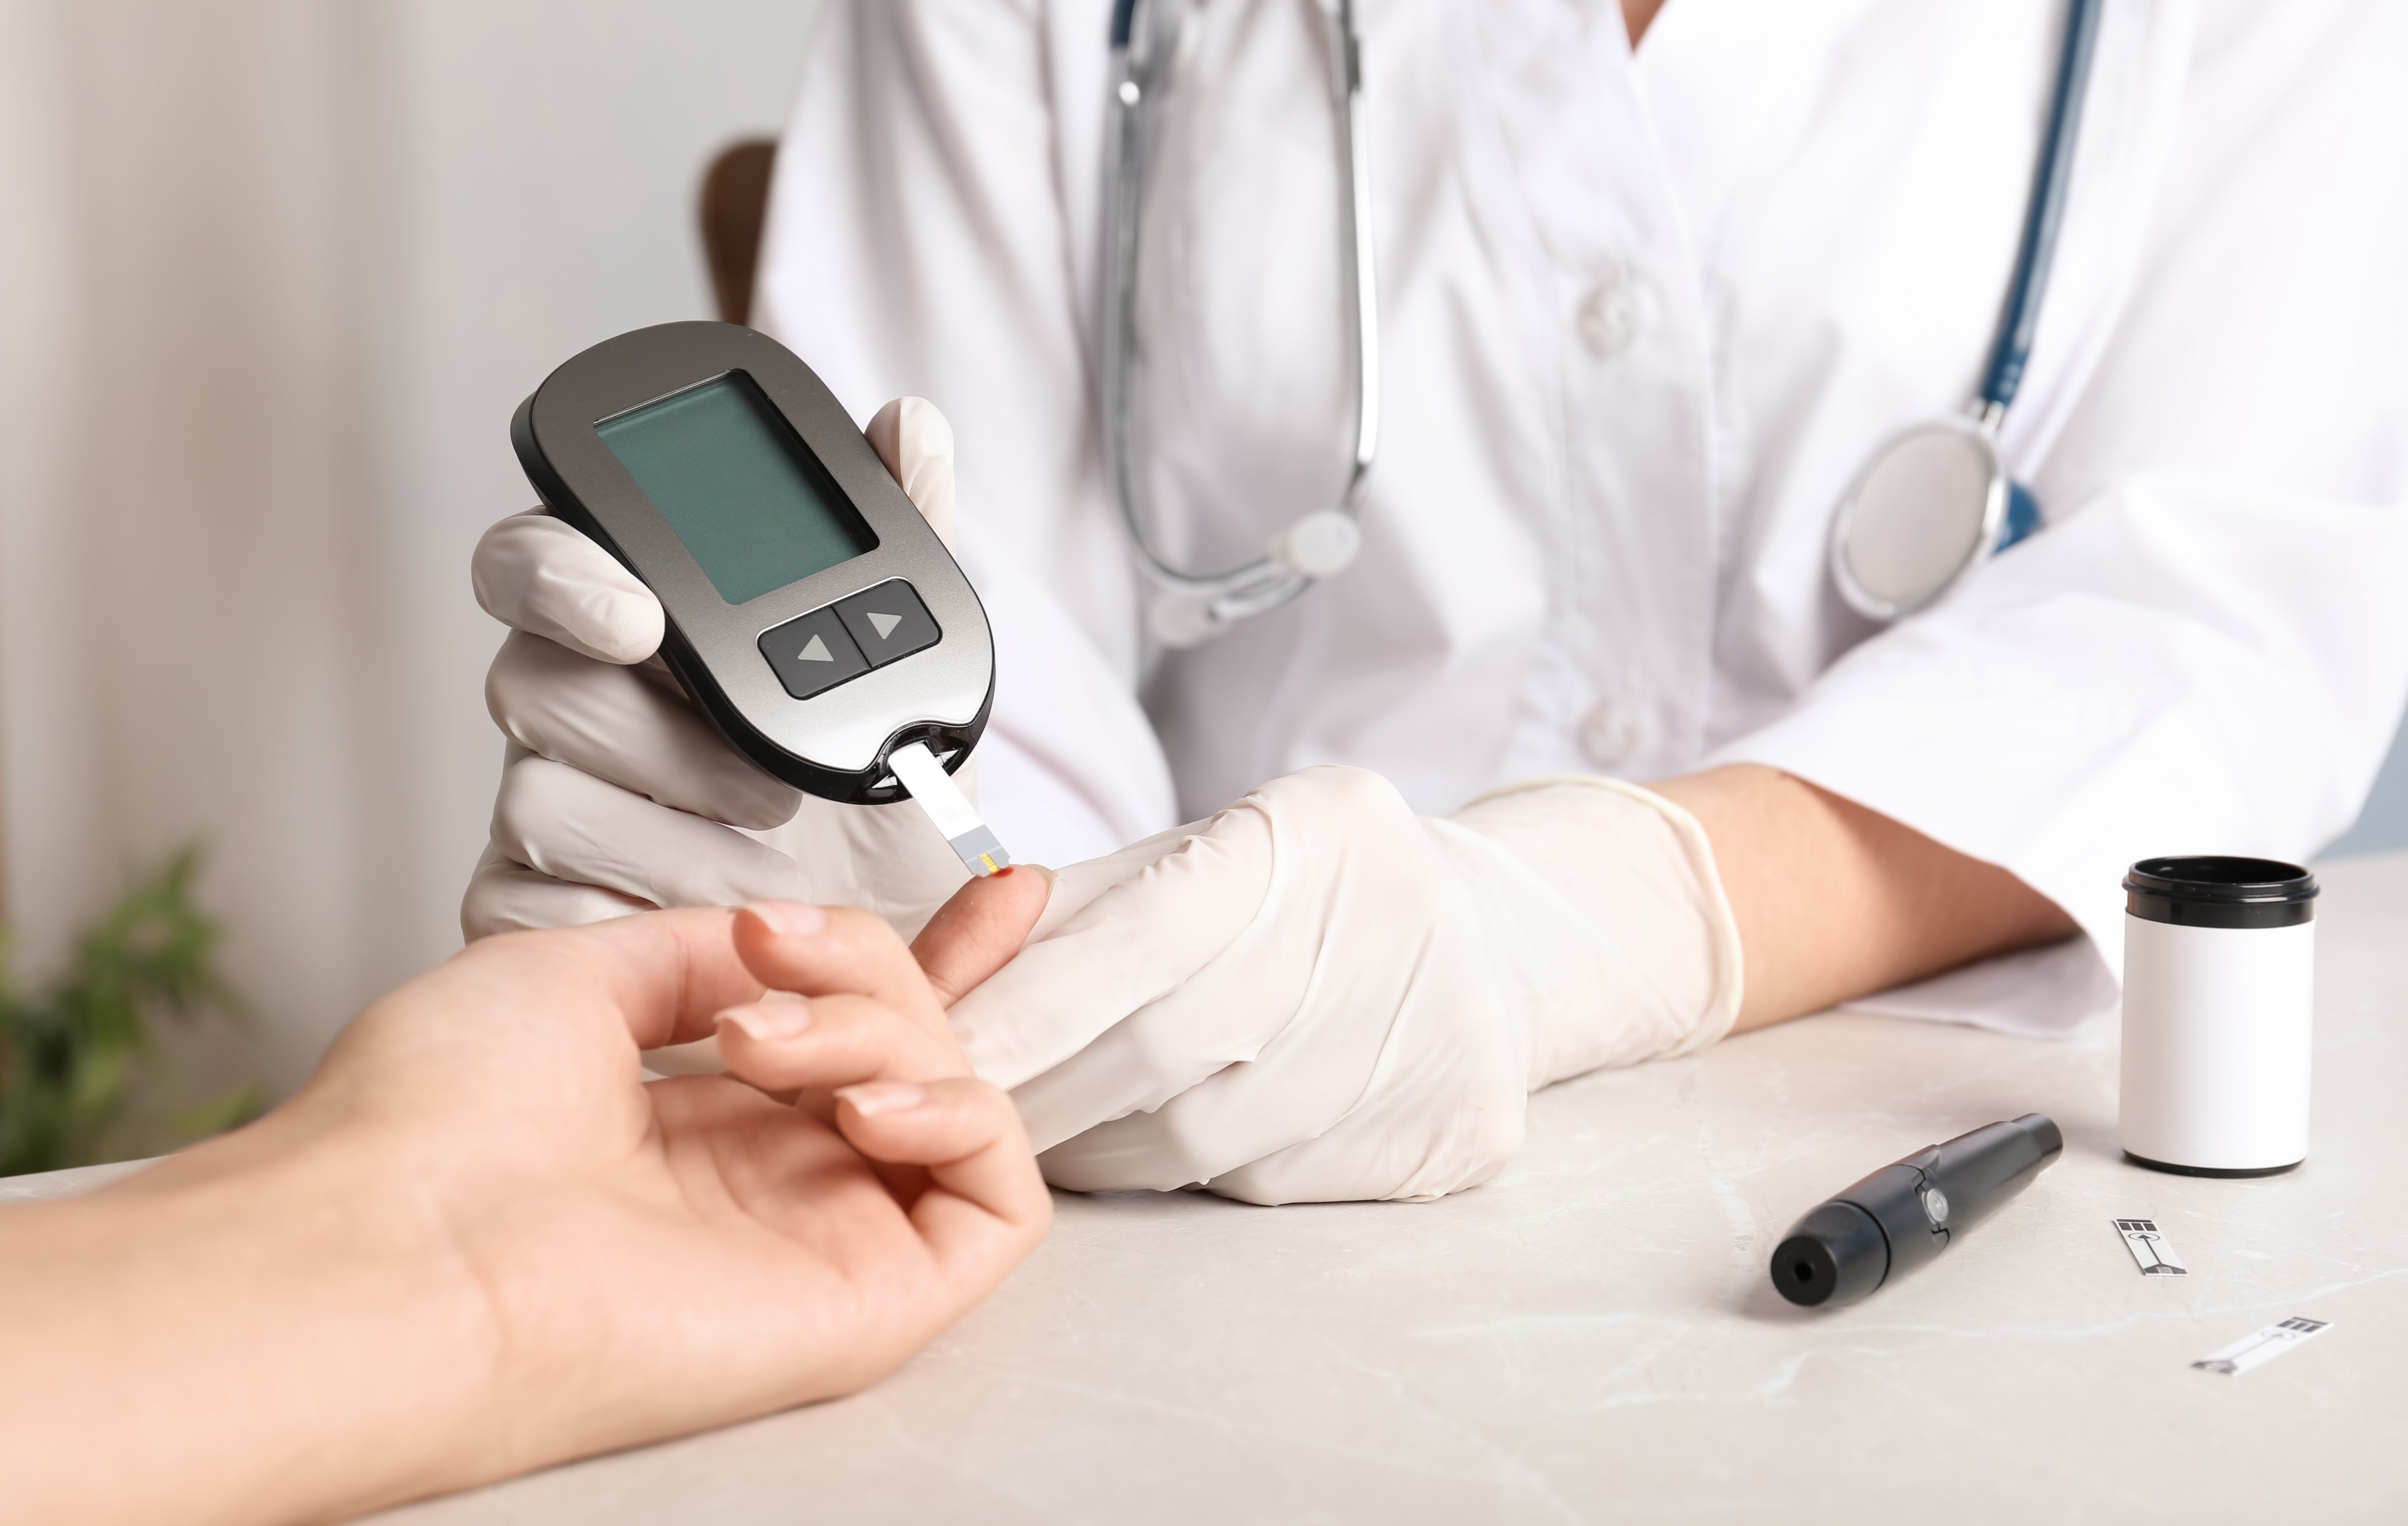 Regardless of the type of diabetes, failure to maintain normal blood glucose levels over time can lead to serious side effects, including heart disease, vision loss and kidney disease. Photo: Shutterstock